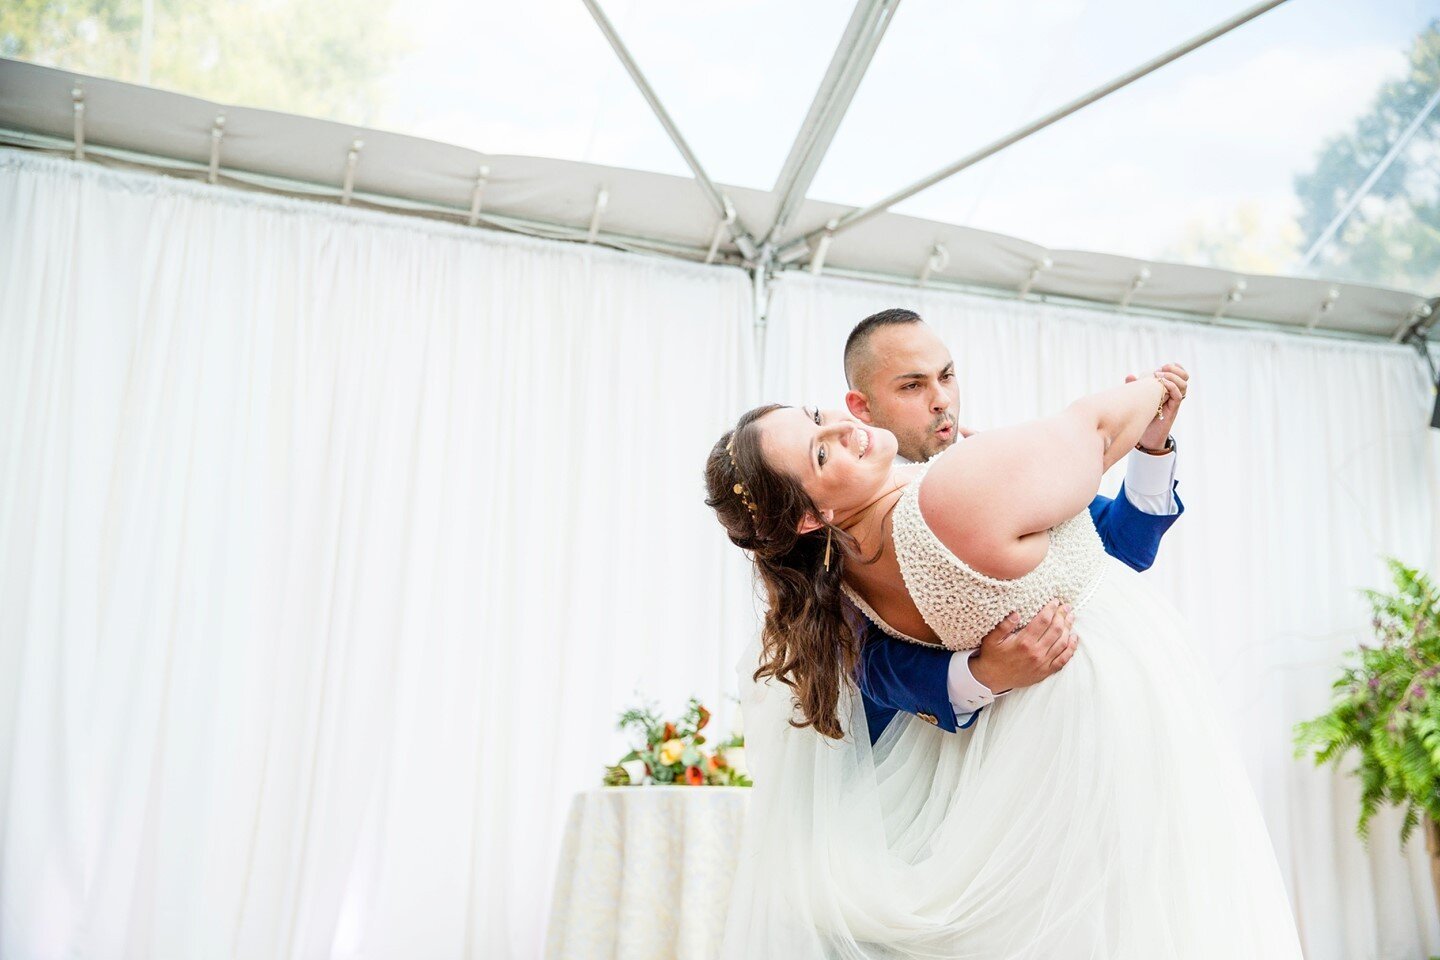 I just adore this photo from Colleen &amp; Brett's first dance! They opted for a choreographed dance for their first dance as husband and wife, and it was totally epic! They put so much time and effort into learning detailed choreography, and it was 